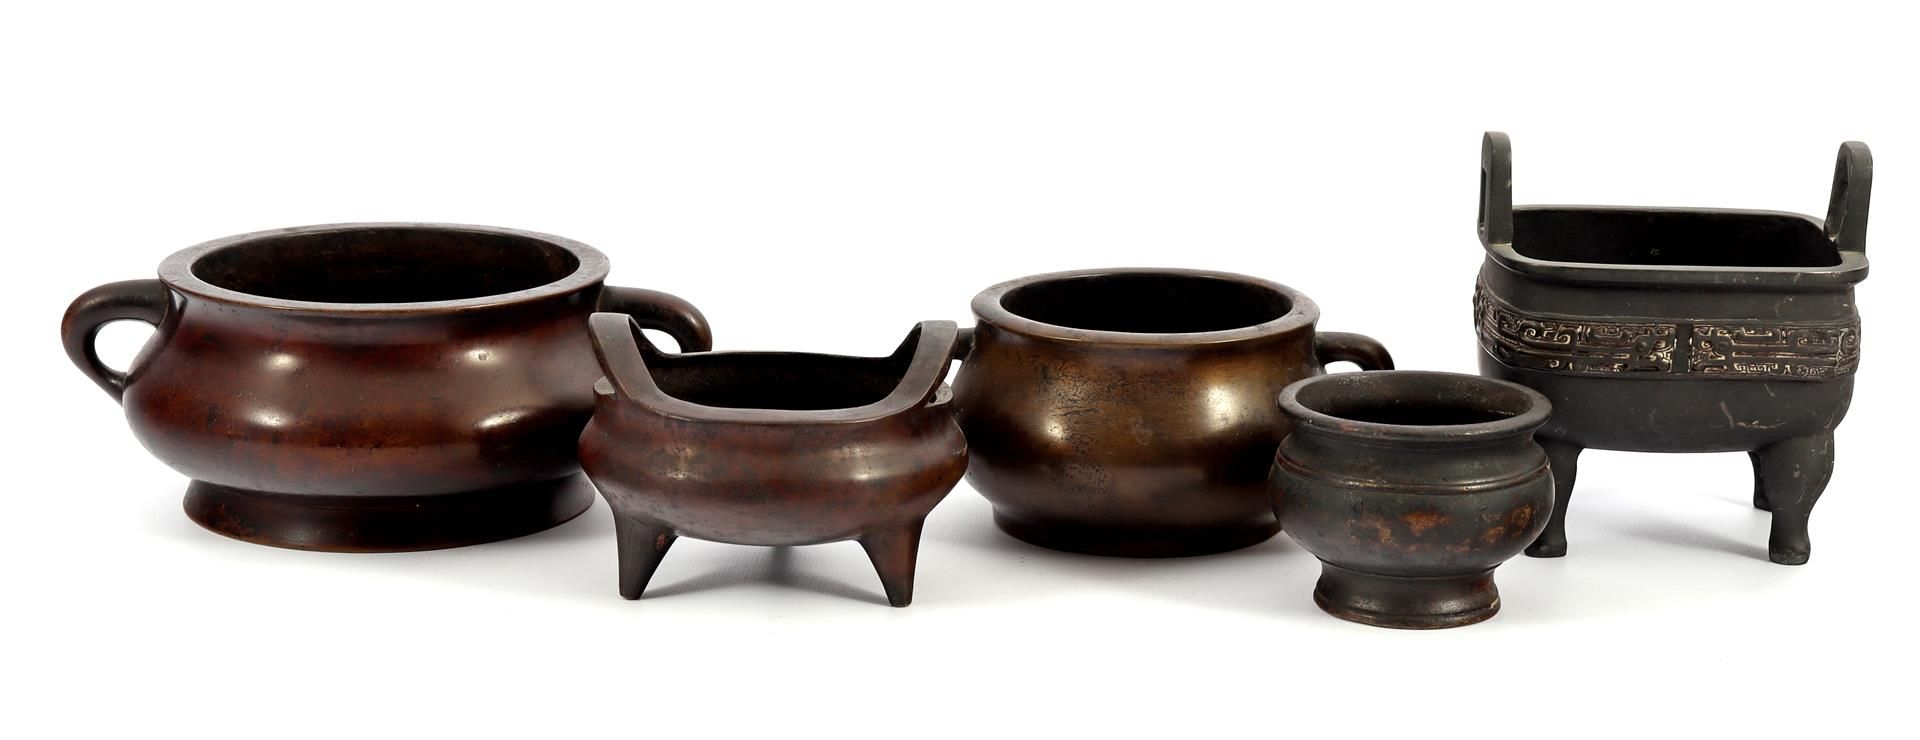 5 Chinese incense burners